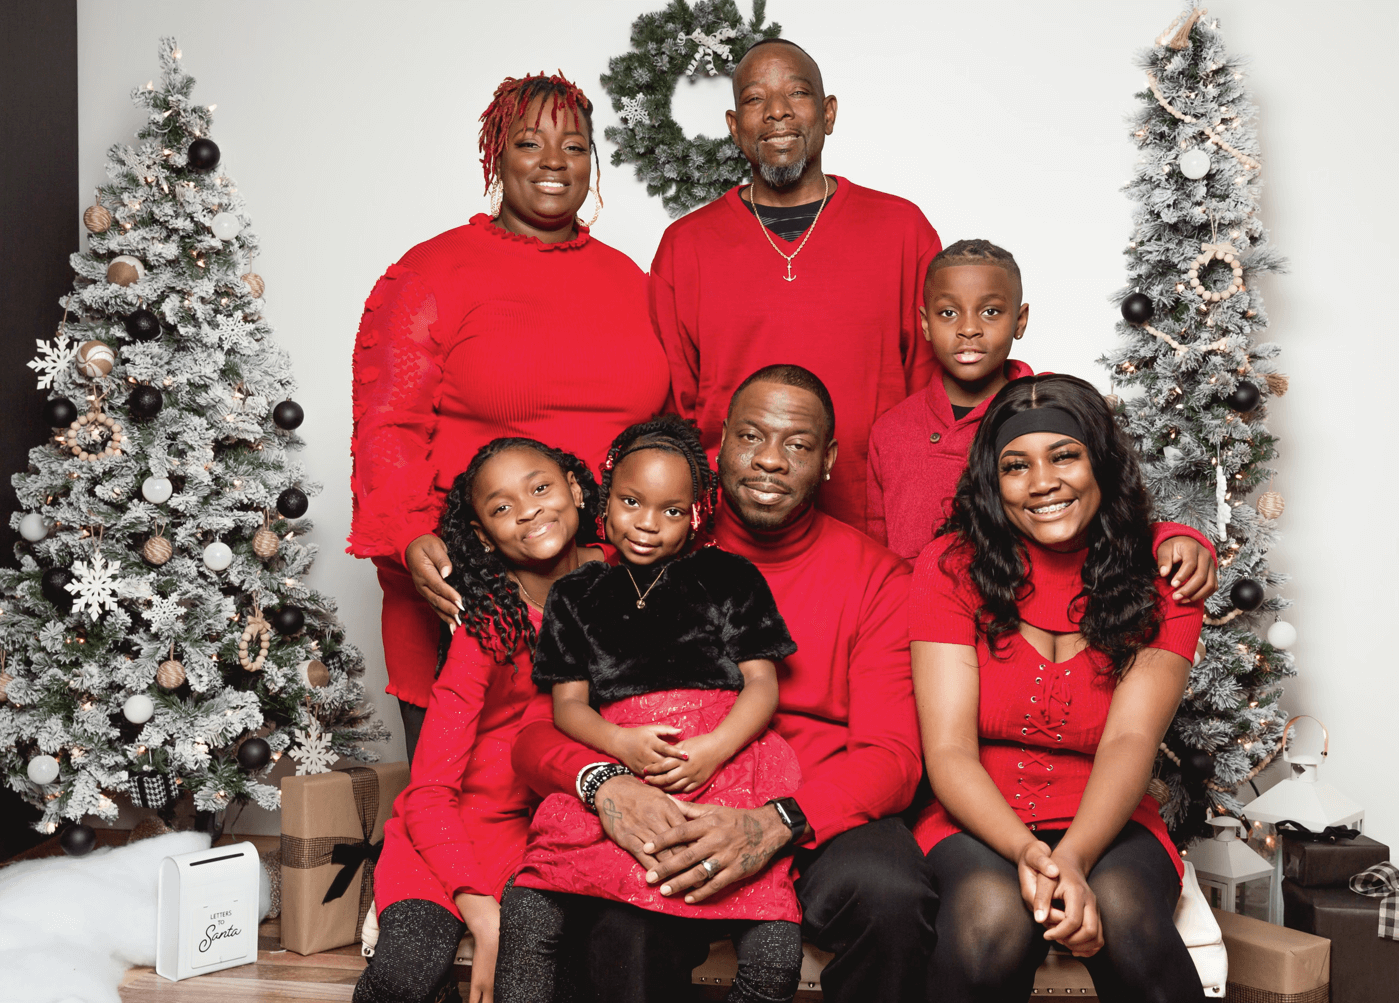 Armond Baskin and his family. Armond is on dialysis and waiting for a kidney transplant.